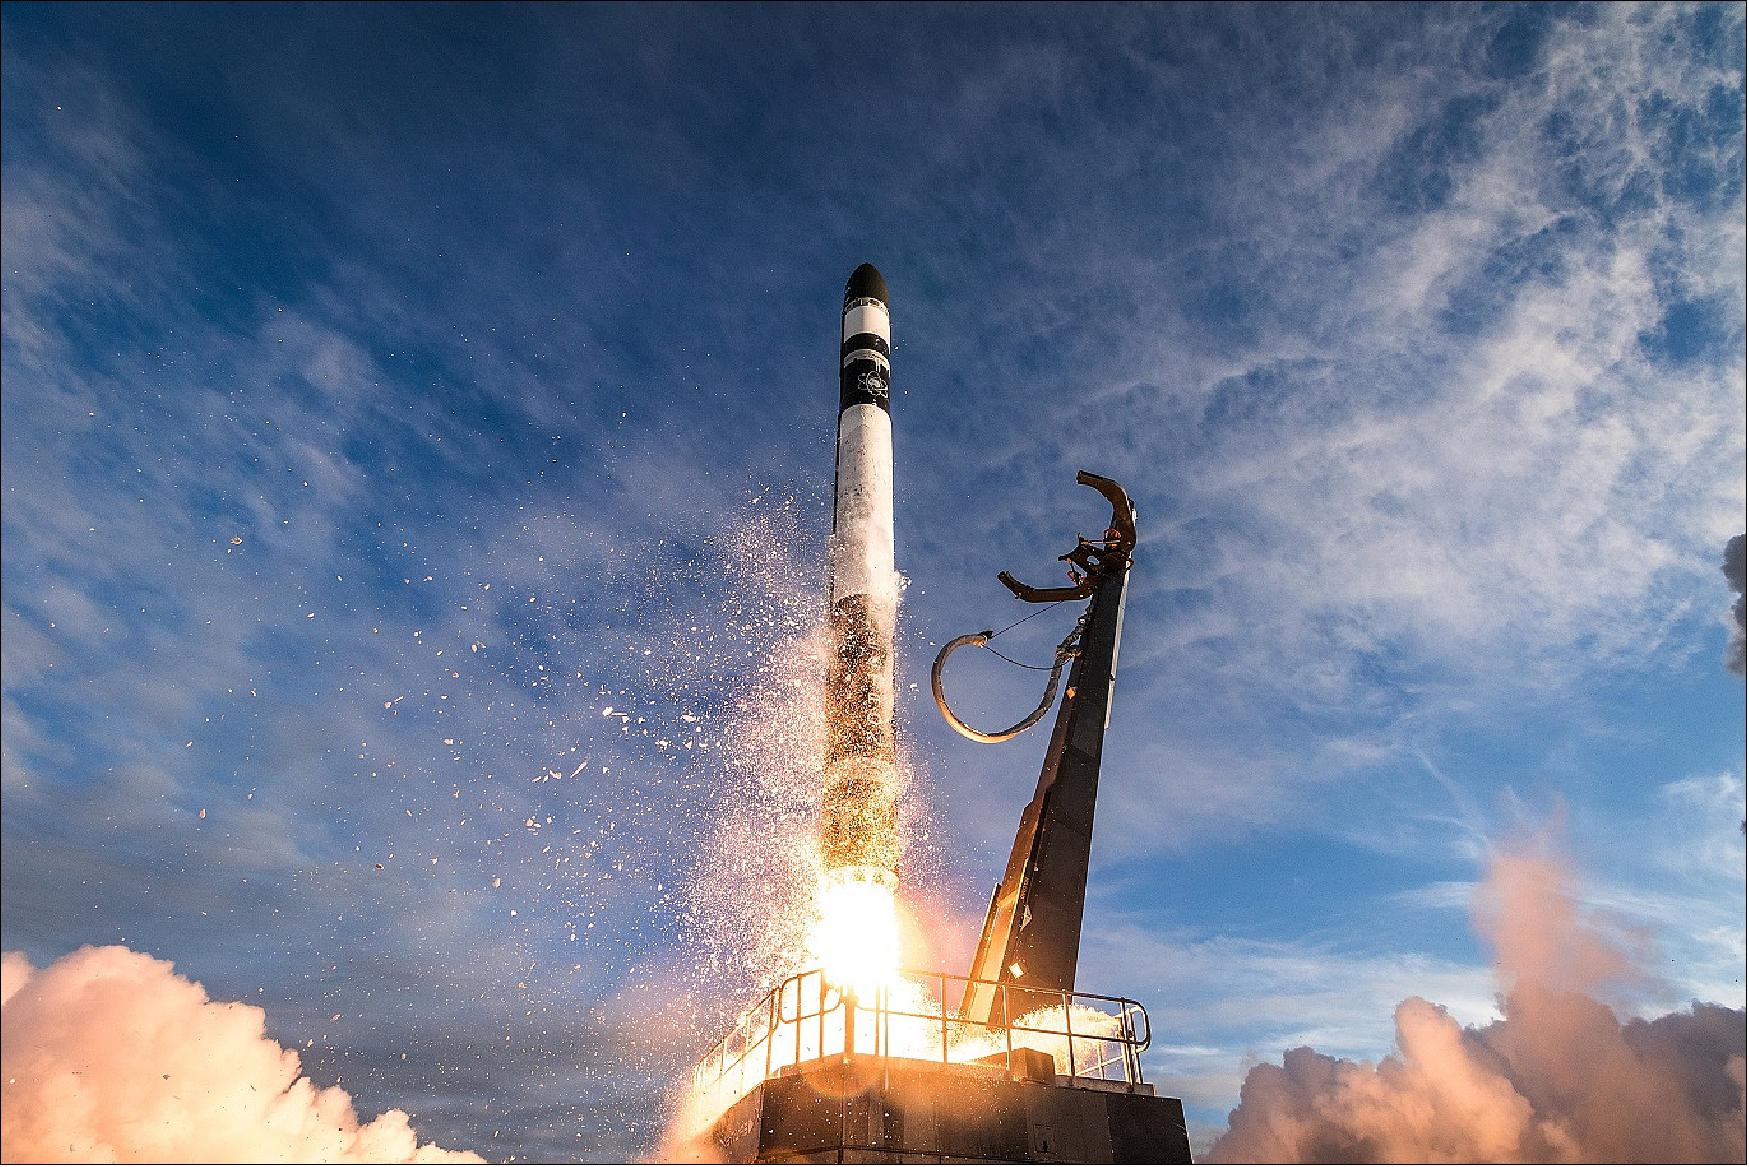 Figure 61: Rocket Lab’s Electron launch vehicle successfully lifted off at 06:33 UTC (19:33 NZDT) from Rocket Lab Launch Complex 1 on New Zealand’s Māhia Peninsula with the ELaNa-19 payloads (image credit: Rocket Lab)